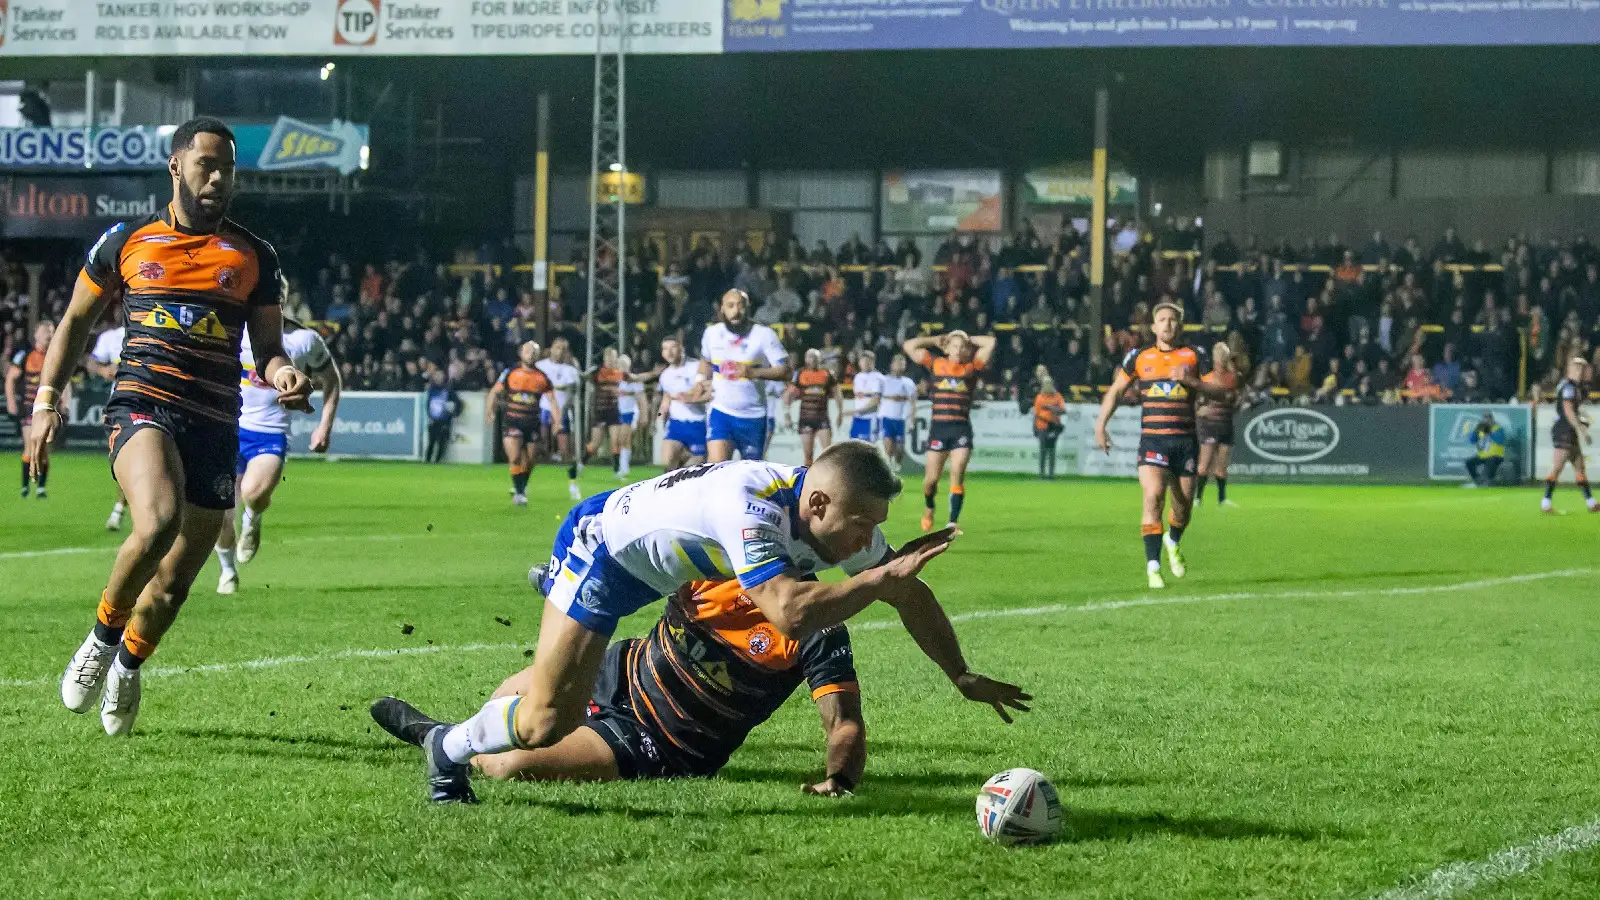 Castleford 0-38 Warrington: The mistake that highlighted Castleford’s fragile nature in Warrington rout